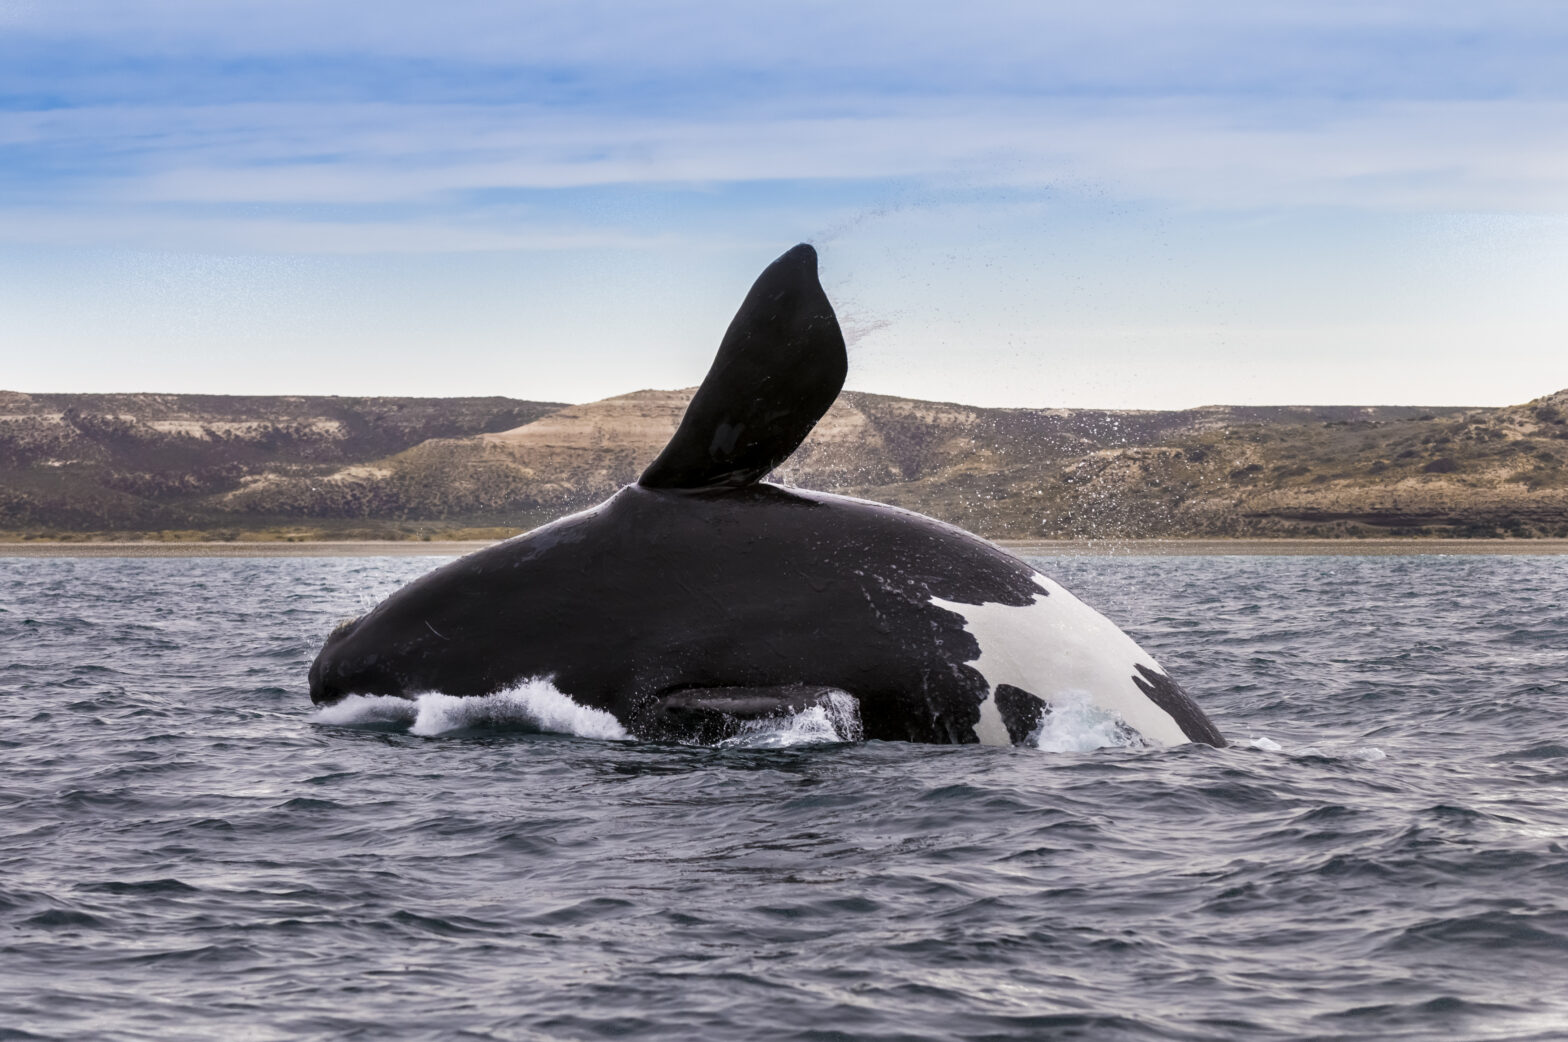 North Atlantic Right Whale swimming in the ocean